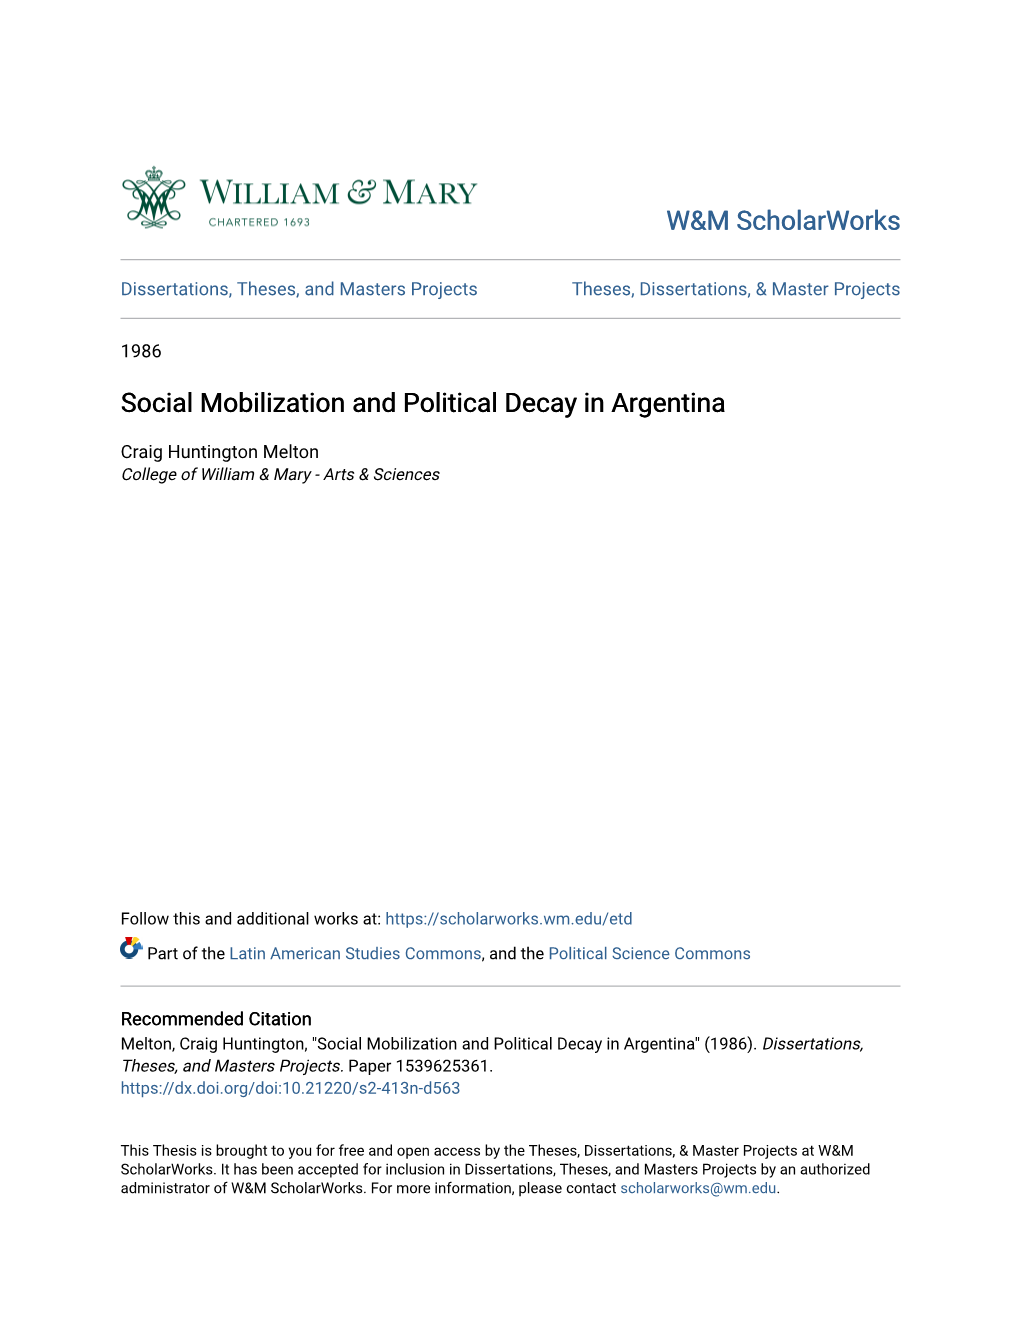 Social Mobilization and Political Decay in Argentina